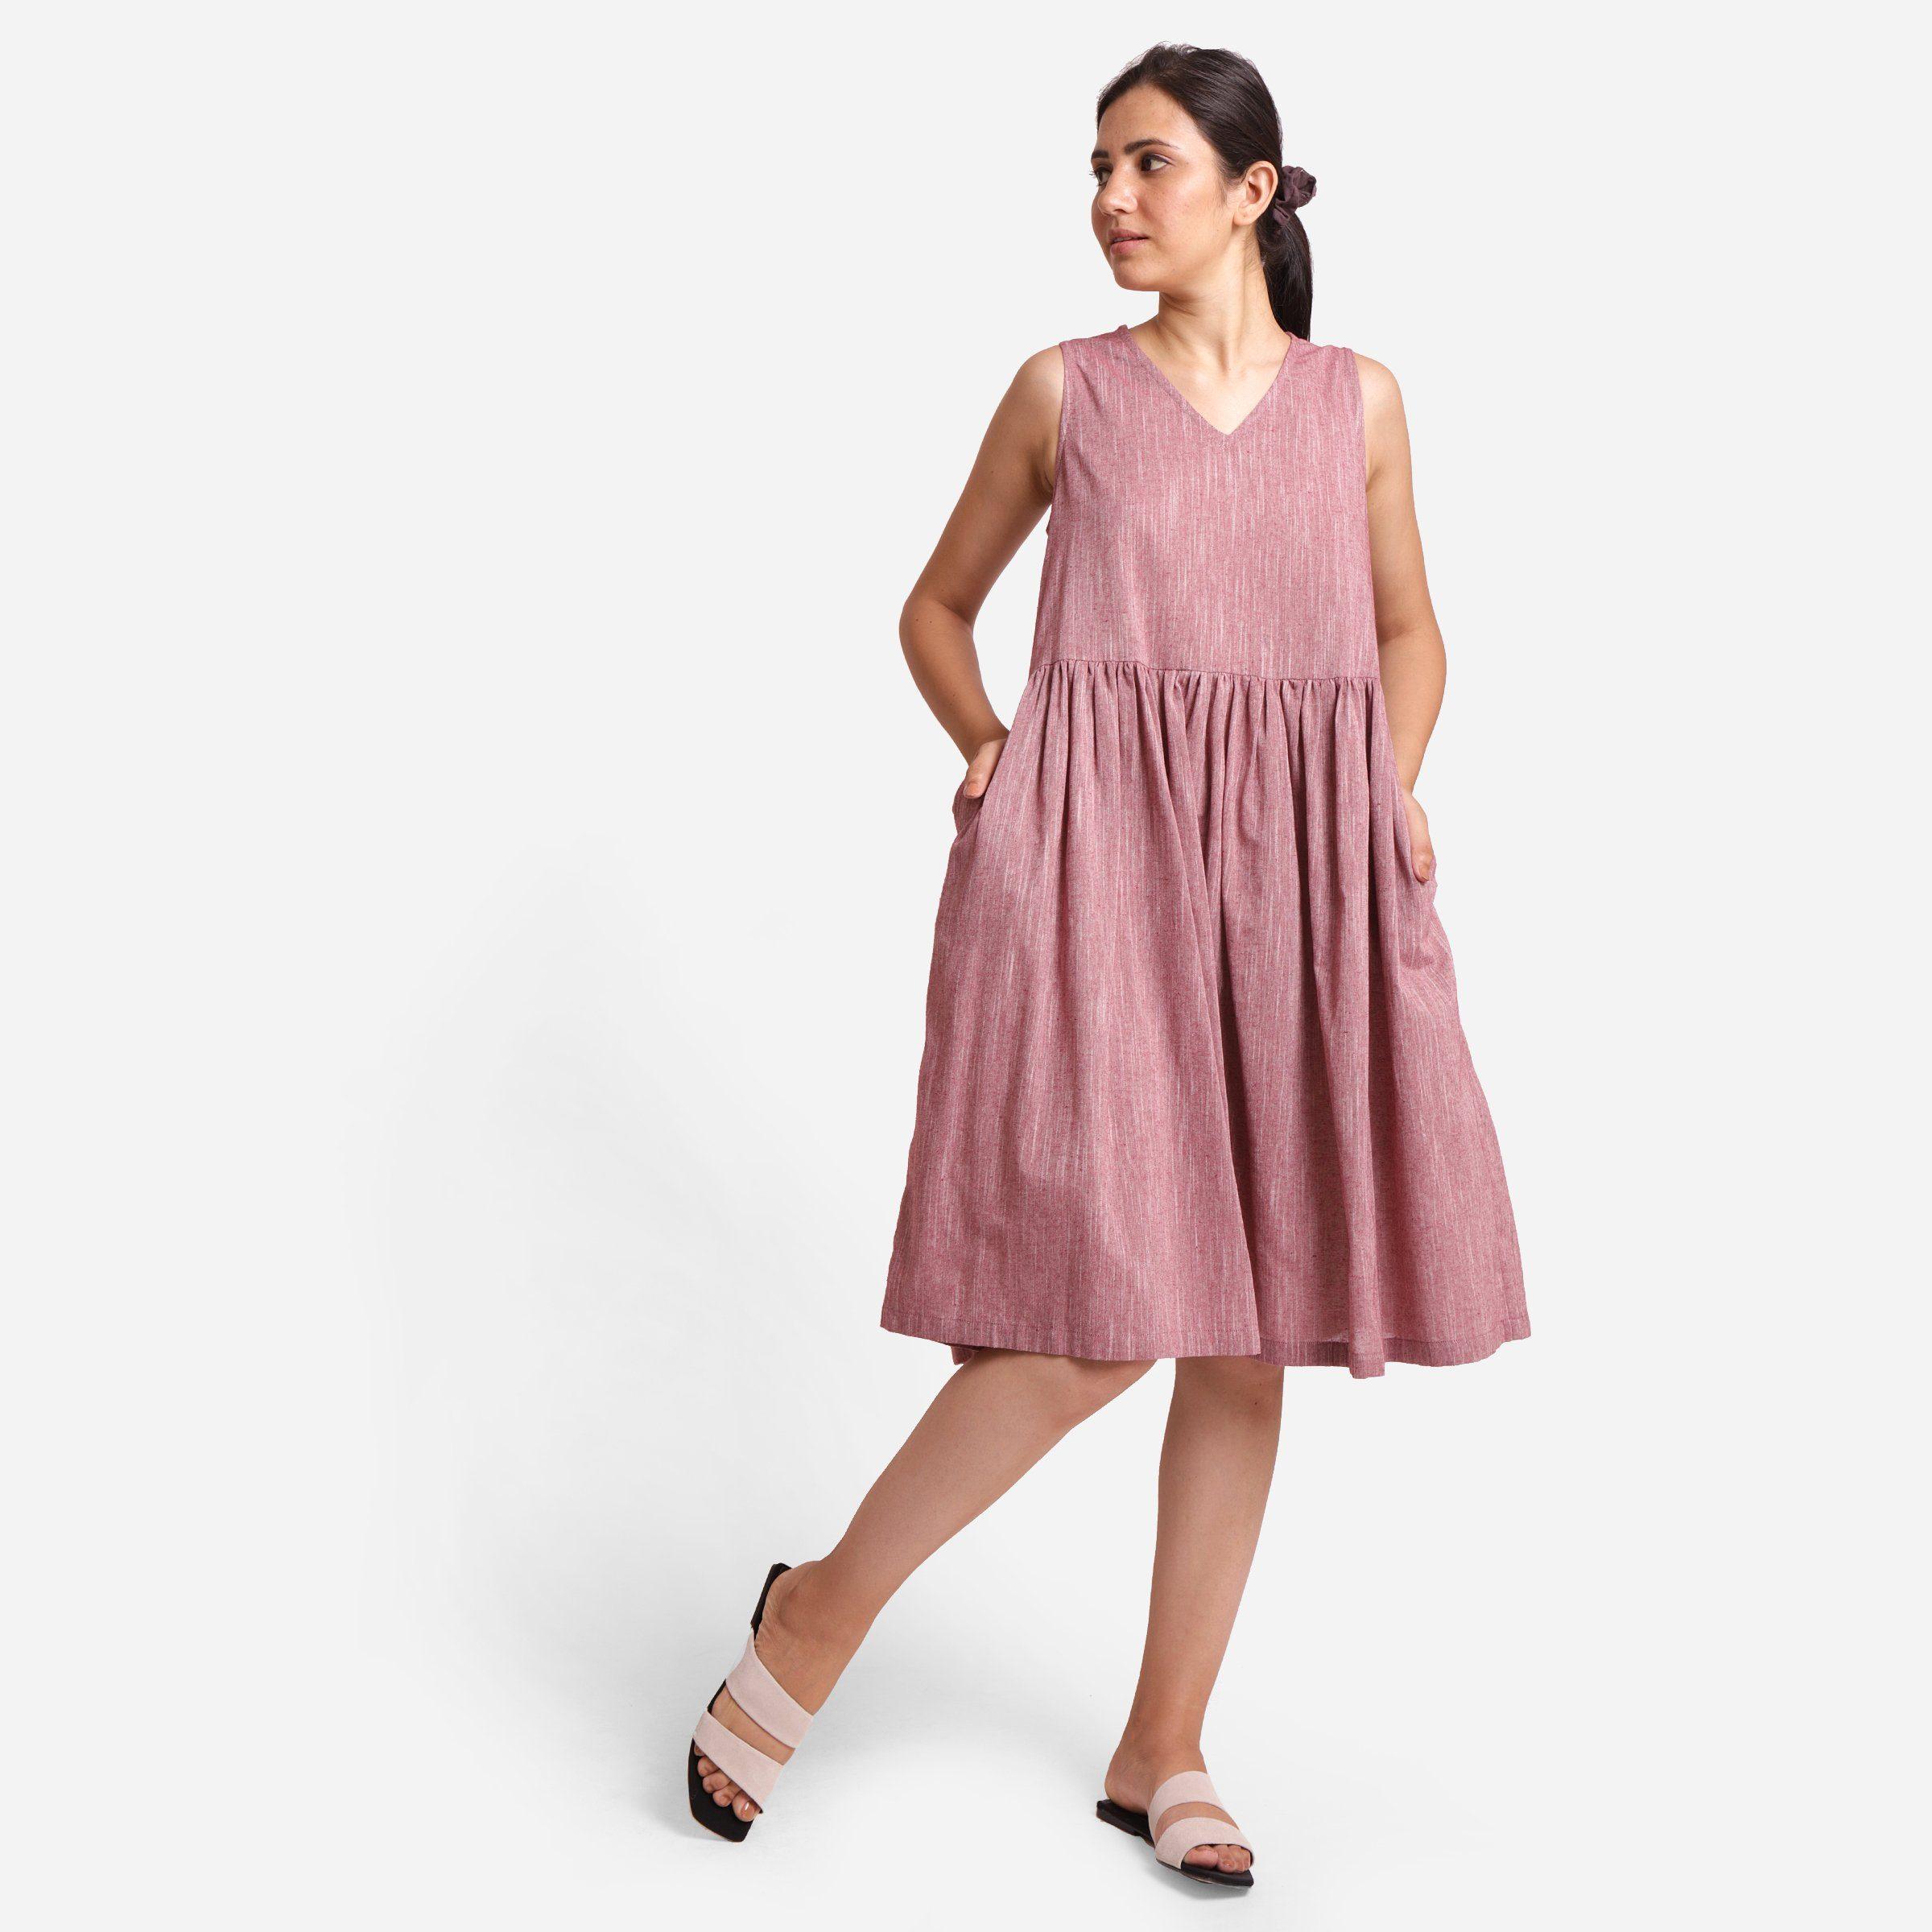 Shop Fit and Flare Dresses for Women